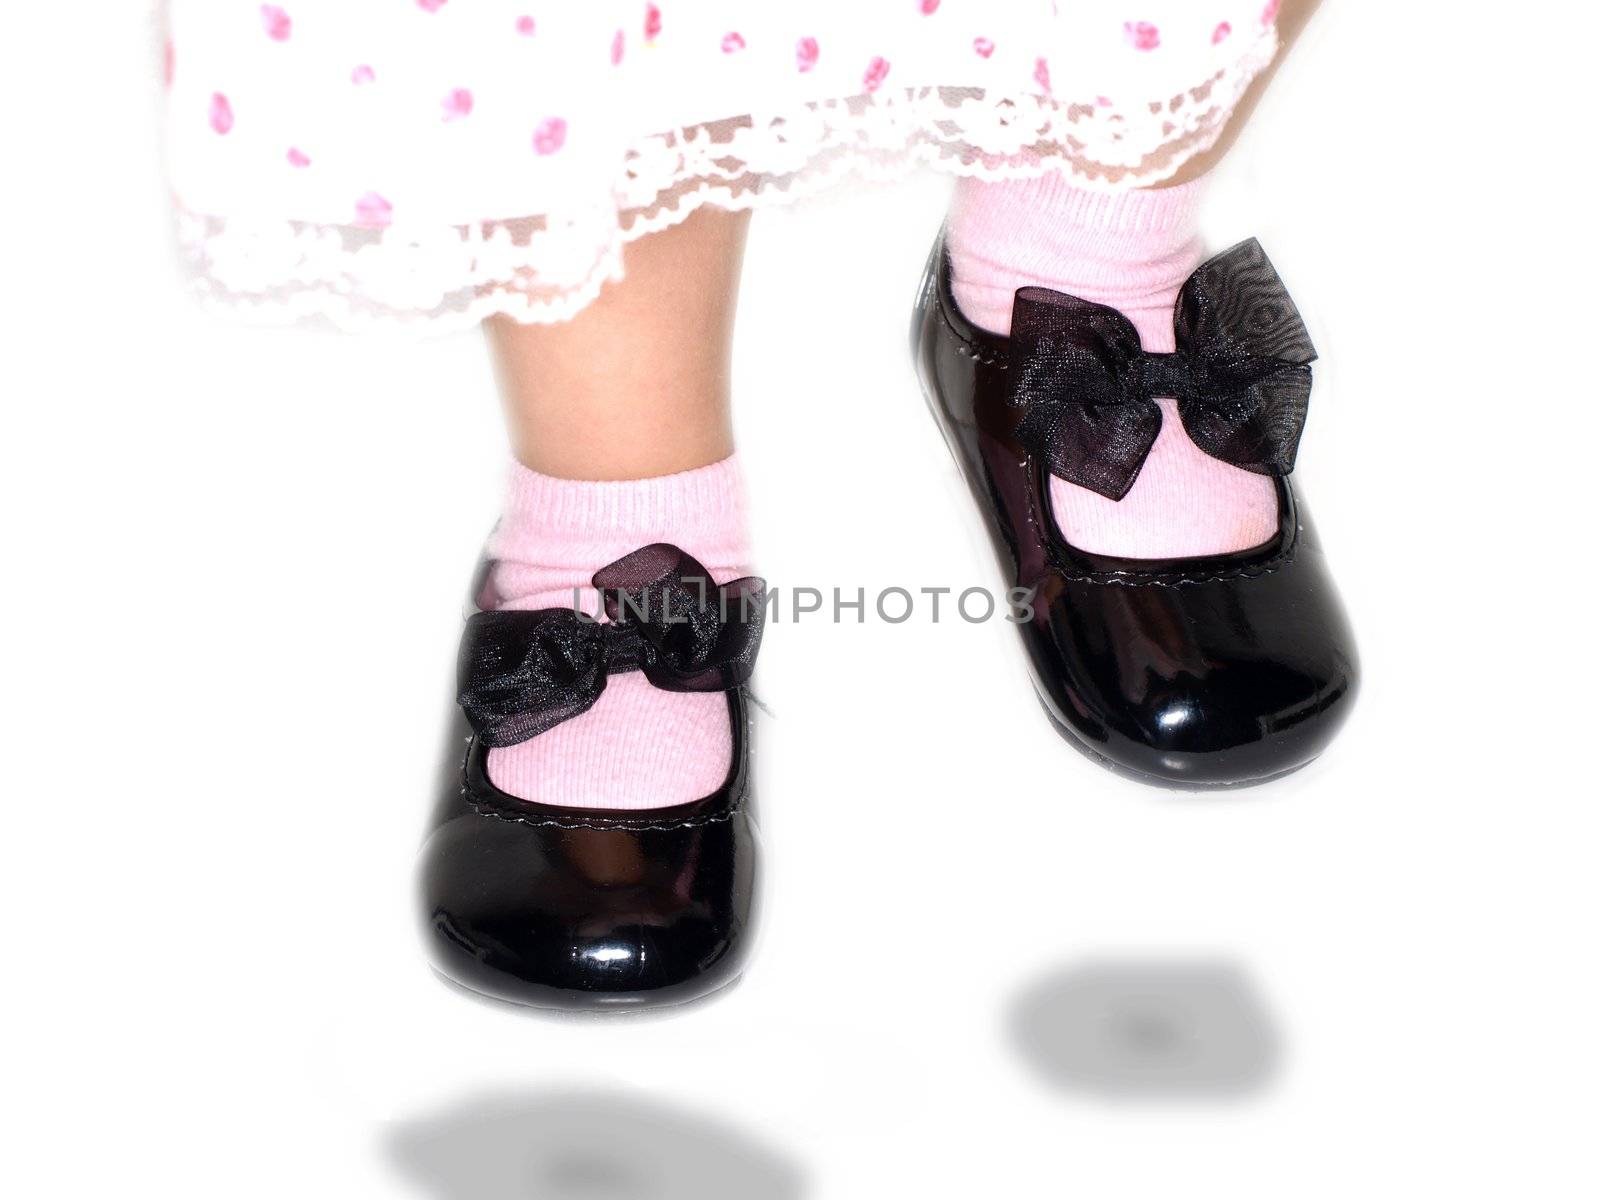 Girl in cute dress, jumping high with shiny black shoes towards white by Arvebettum